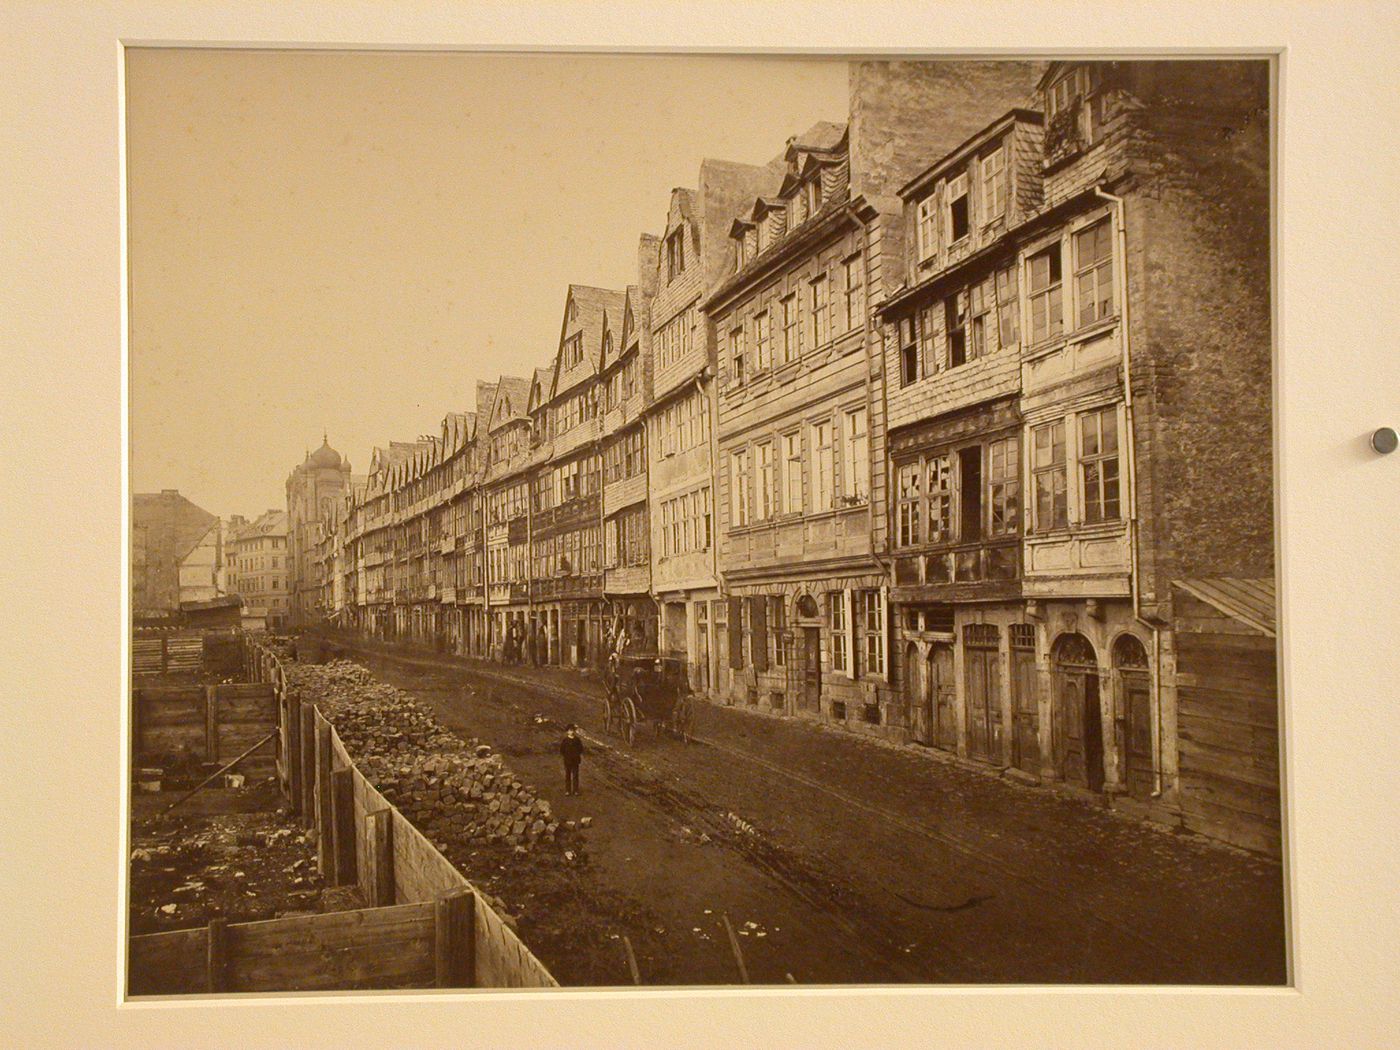 View of remnants of the Judengasse after partial demolition in 1874, Frankfurt am Main, Germany